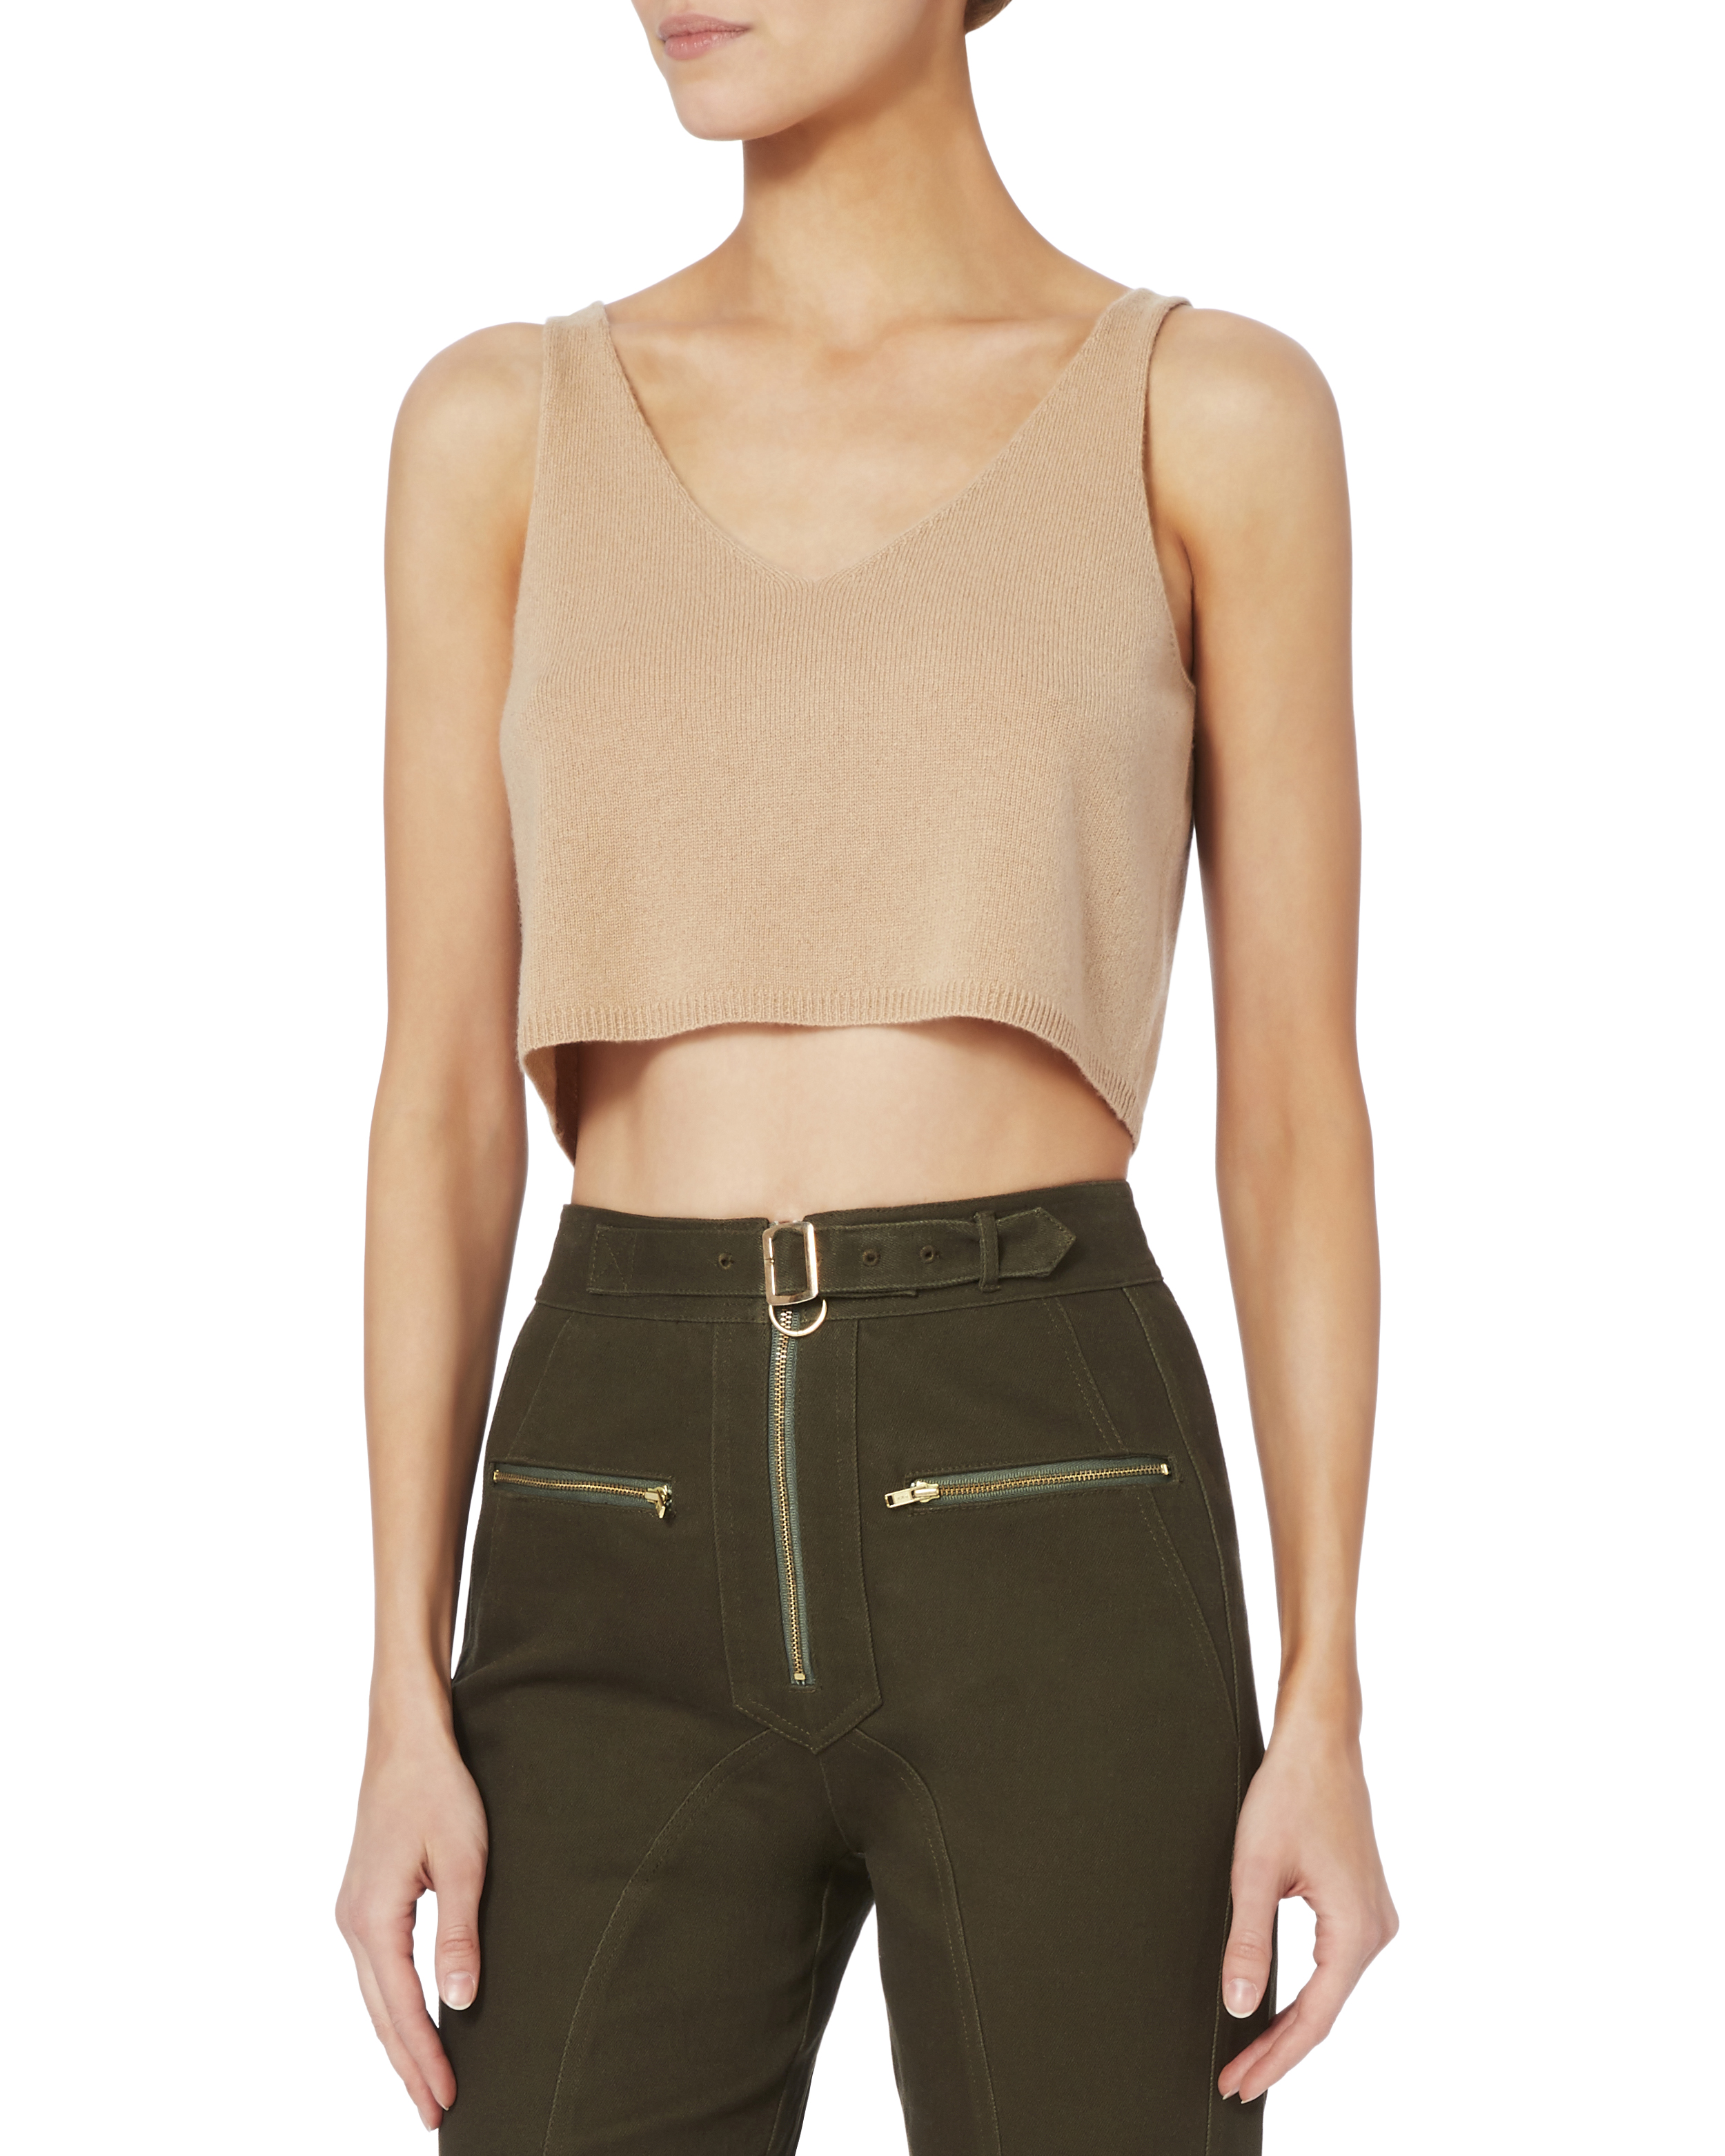 ThePerfext Kendall Cropped Cashmere Tank Top - INTERMIX®